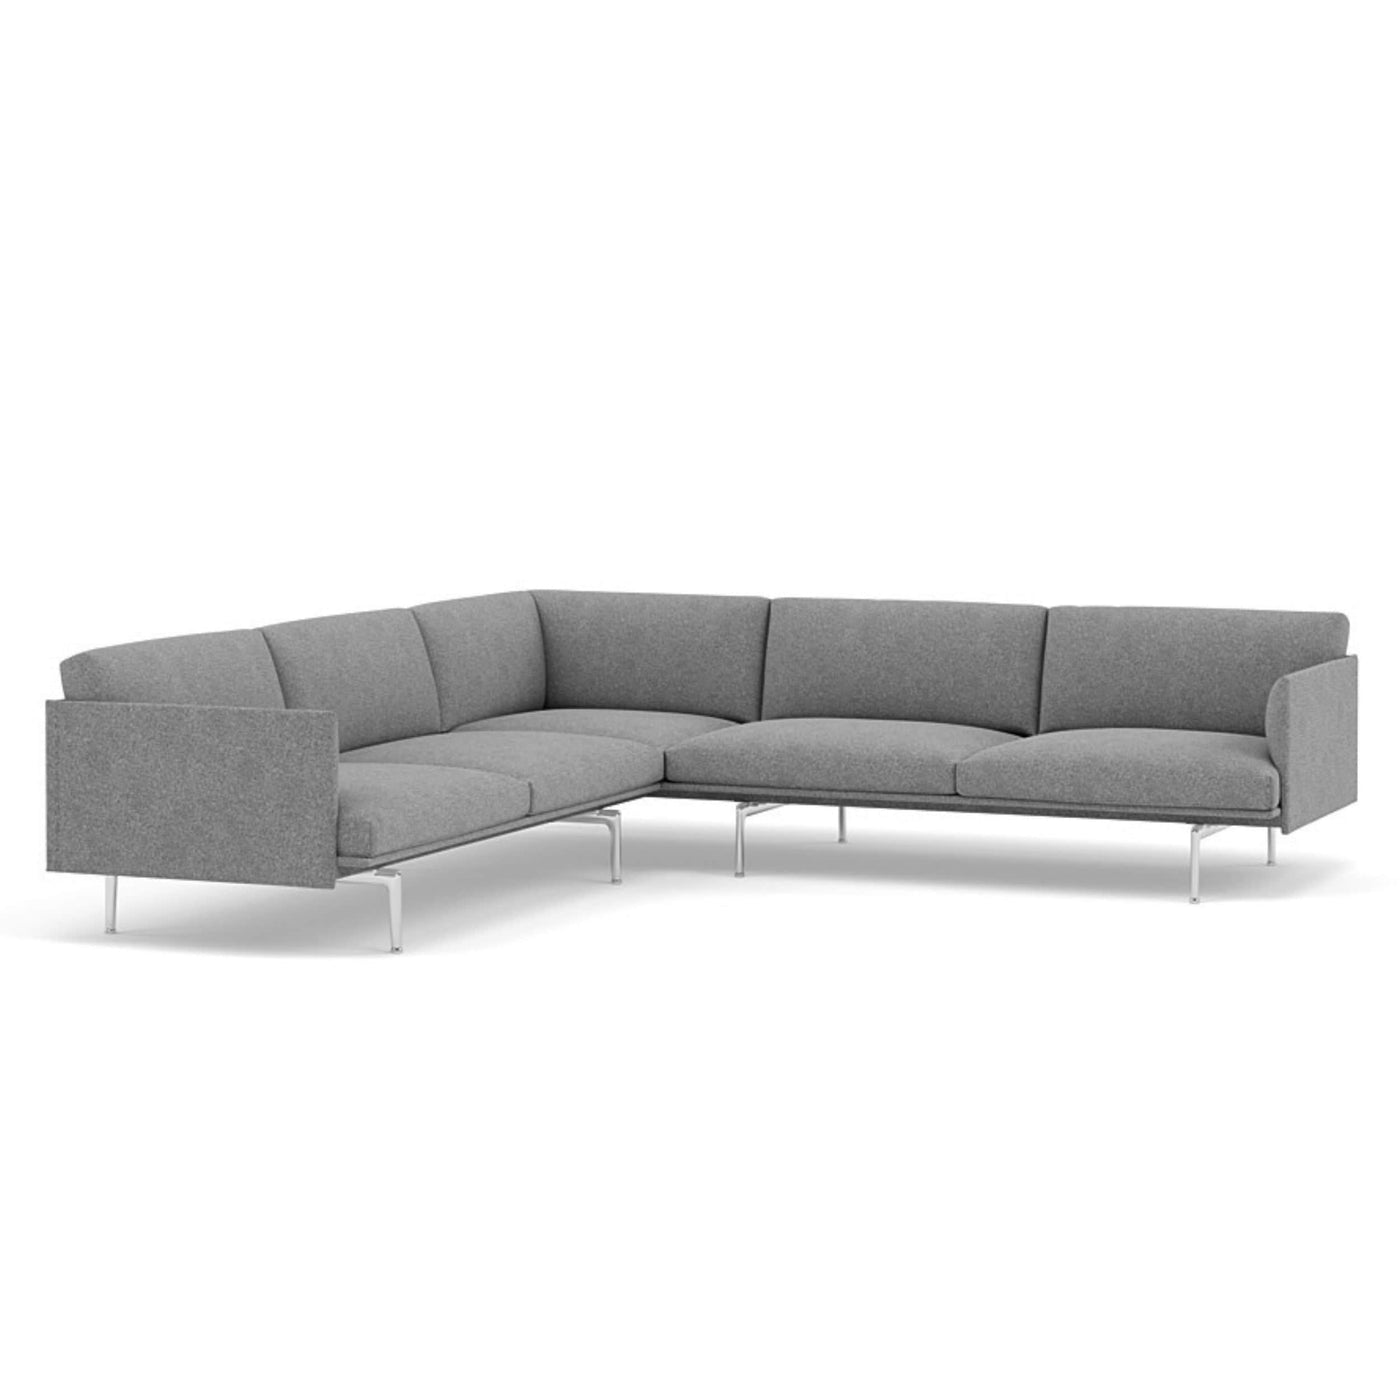 muuto outline corner sofa in hallingdal 166 grey fabric and polished aluminium legs. Made to order from someday designs. #colour_hallingdal-166